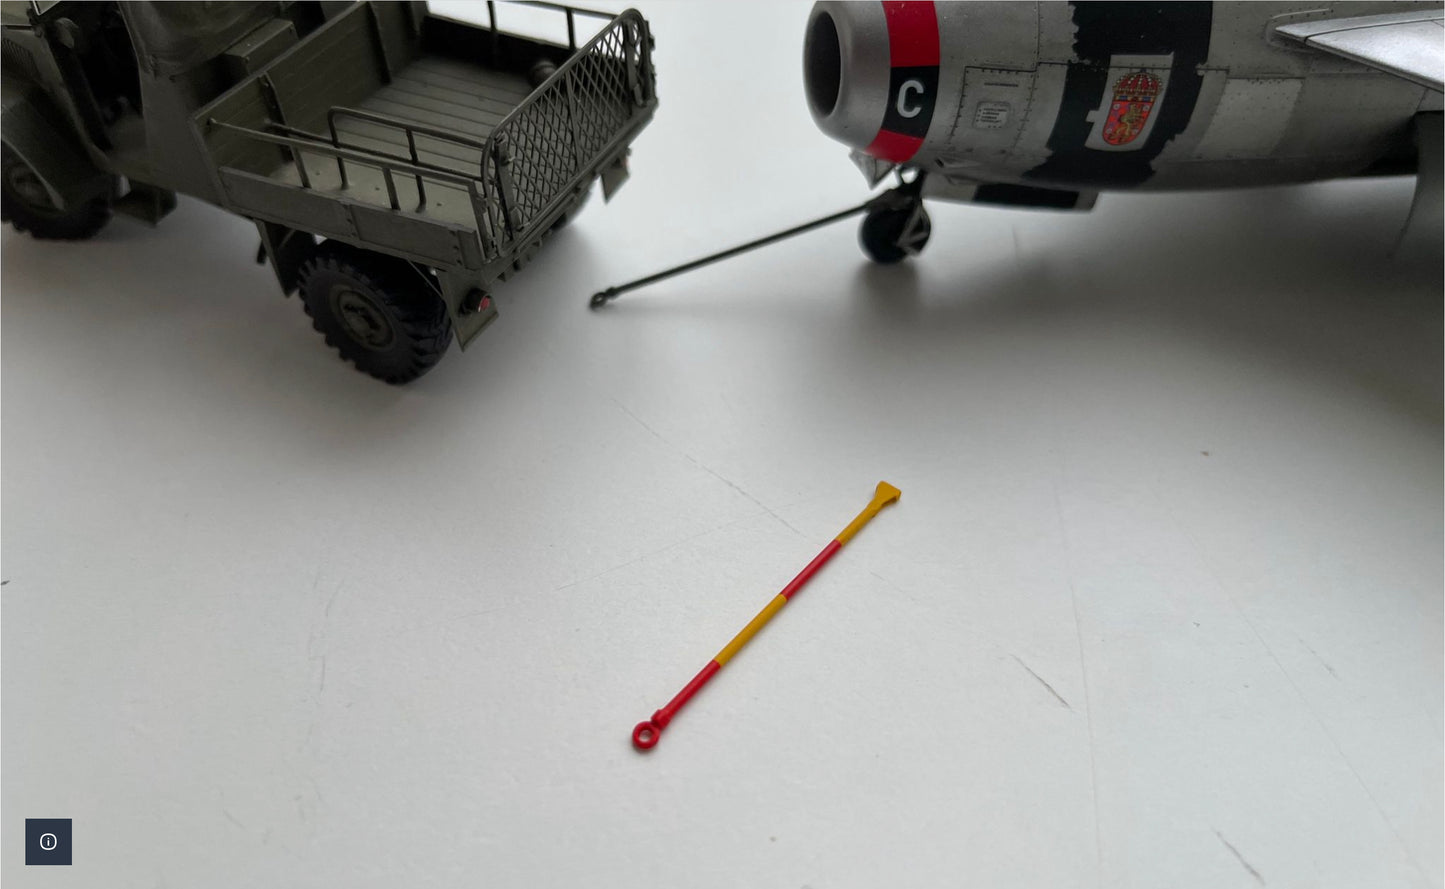 48R013 1/48 scale Tow bar for J29.